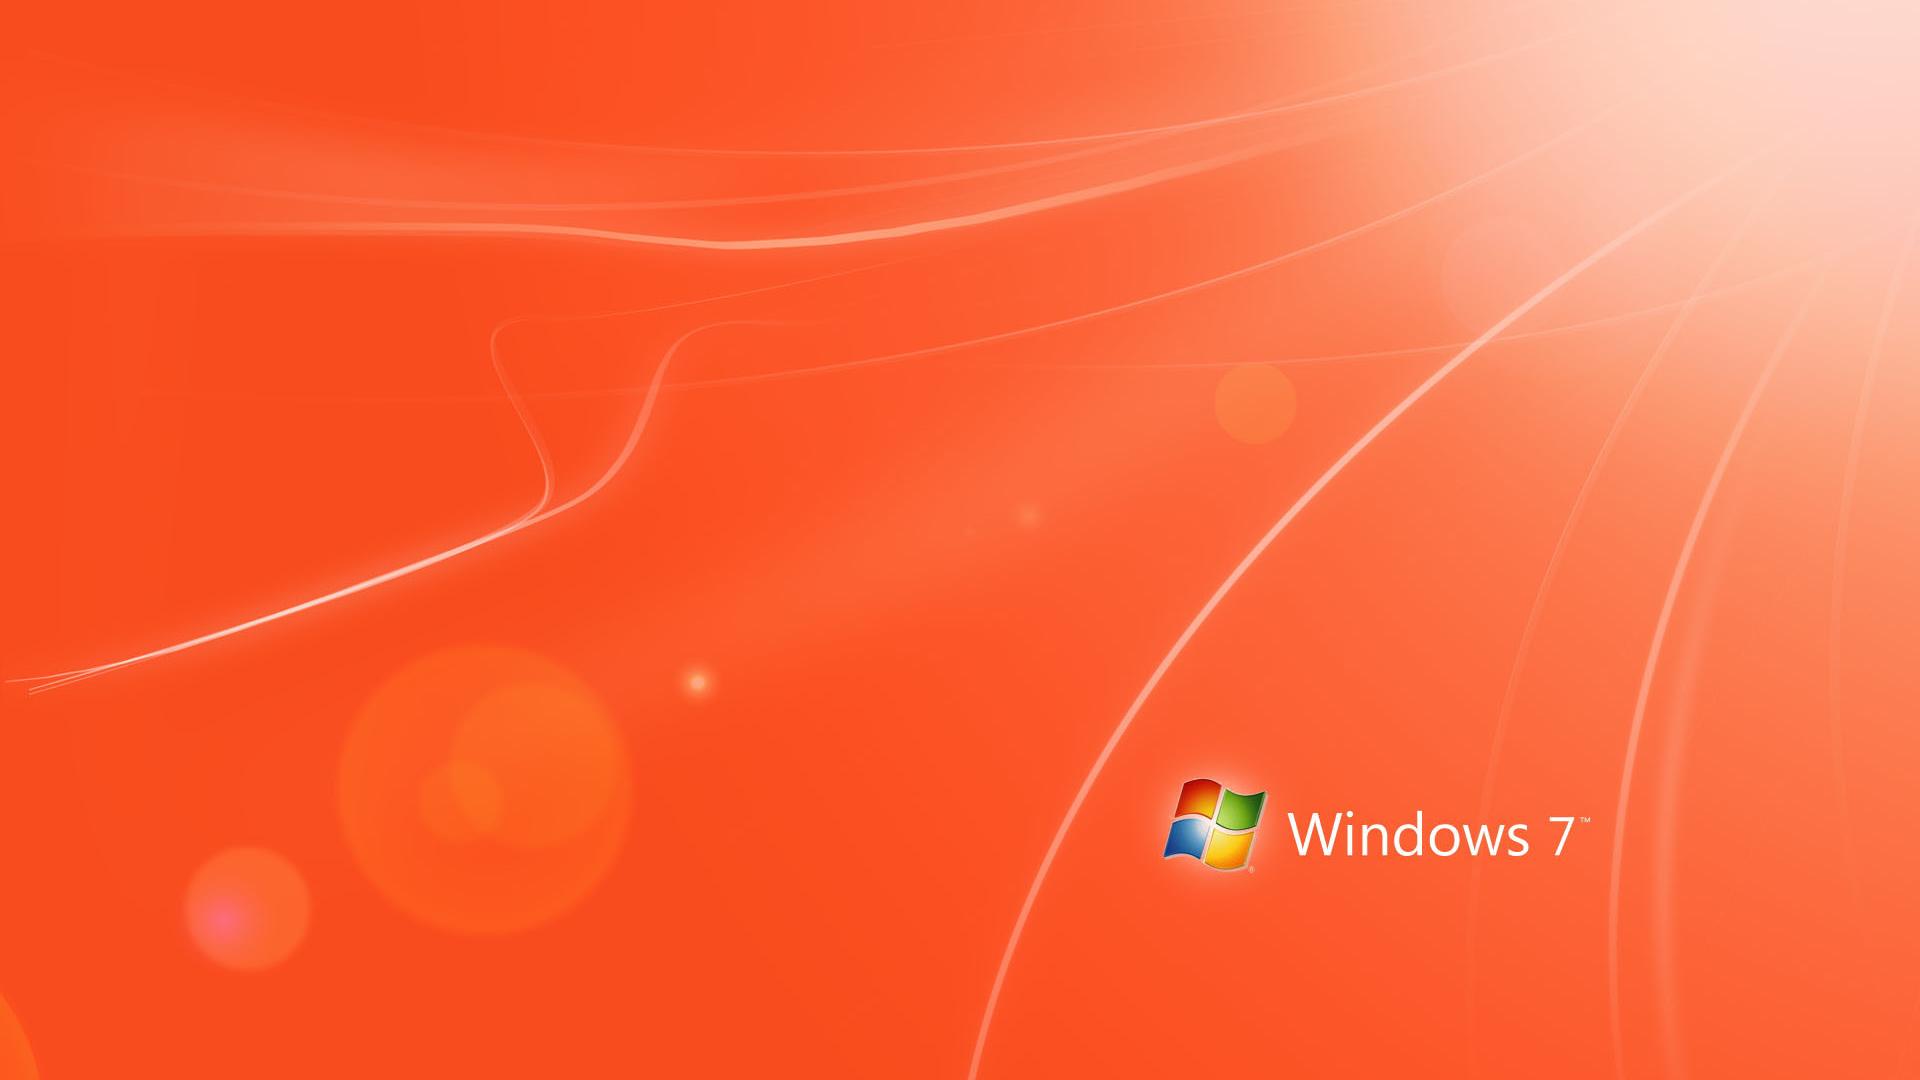 Cool Red Windows 7 Desktop Backgrounds Widescreen and HD ...